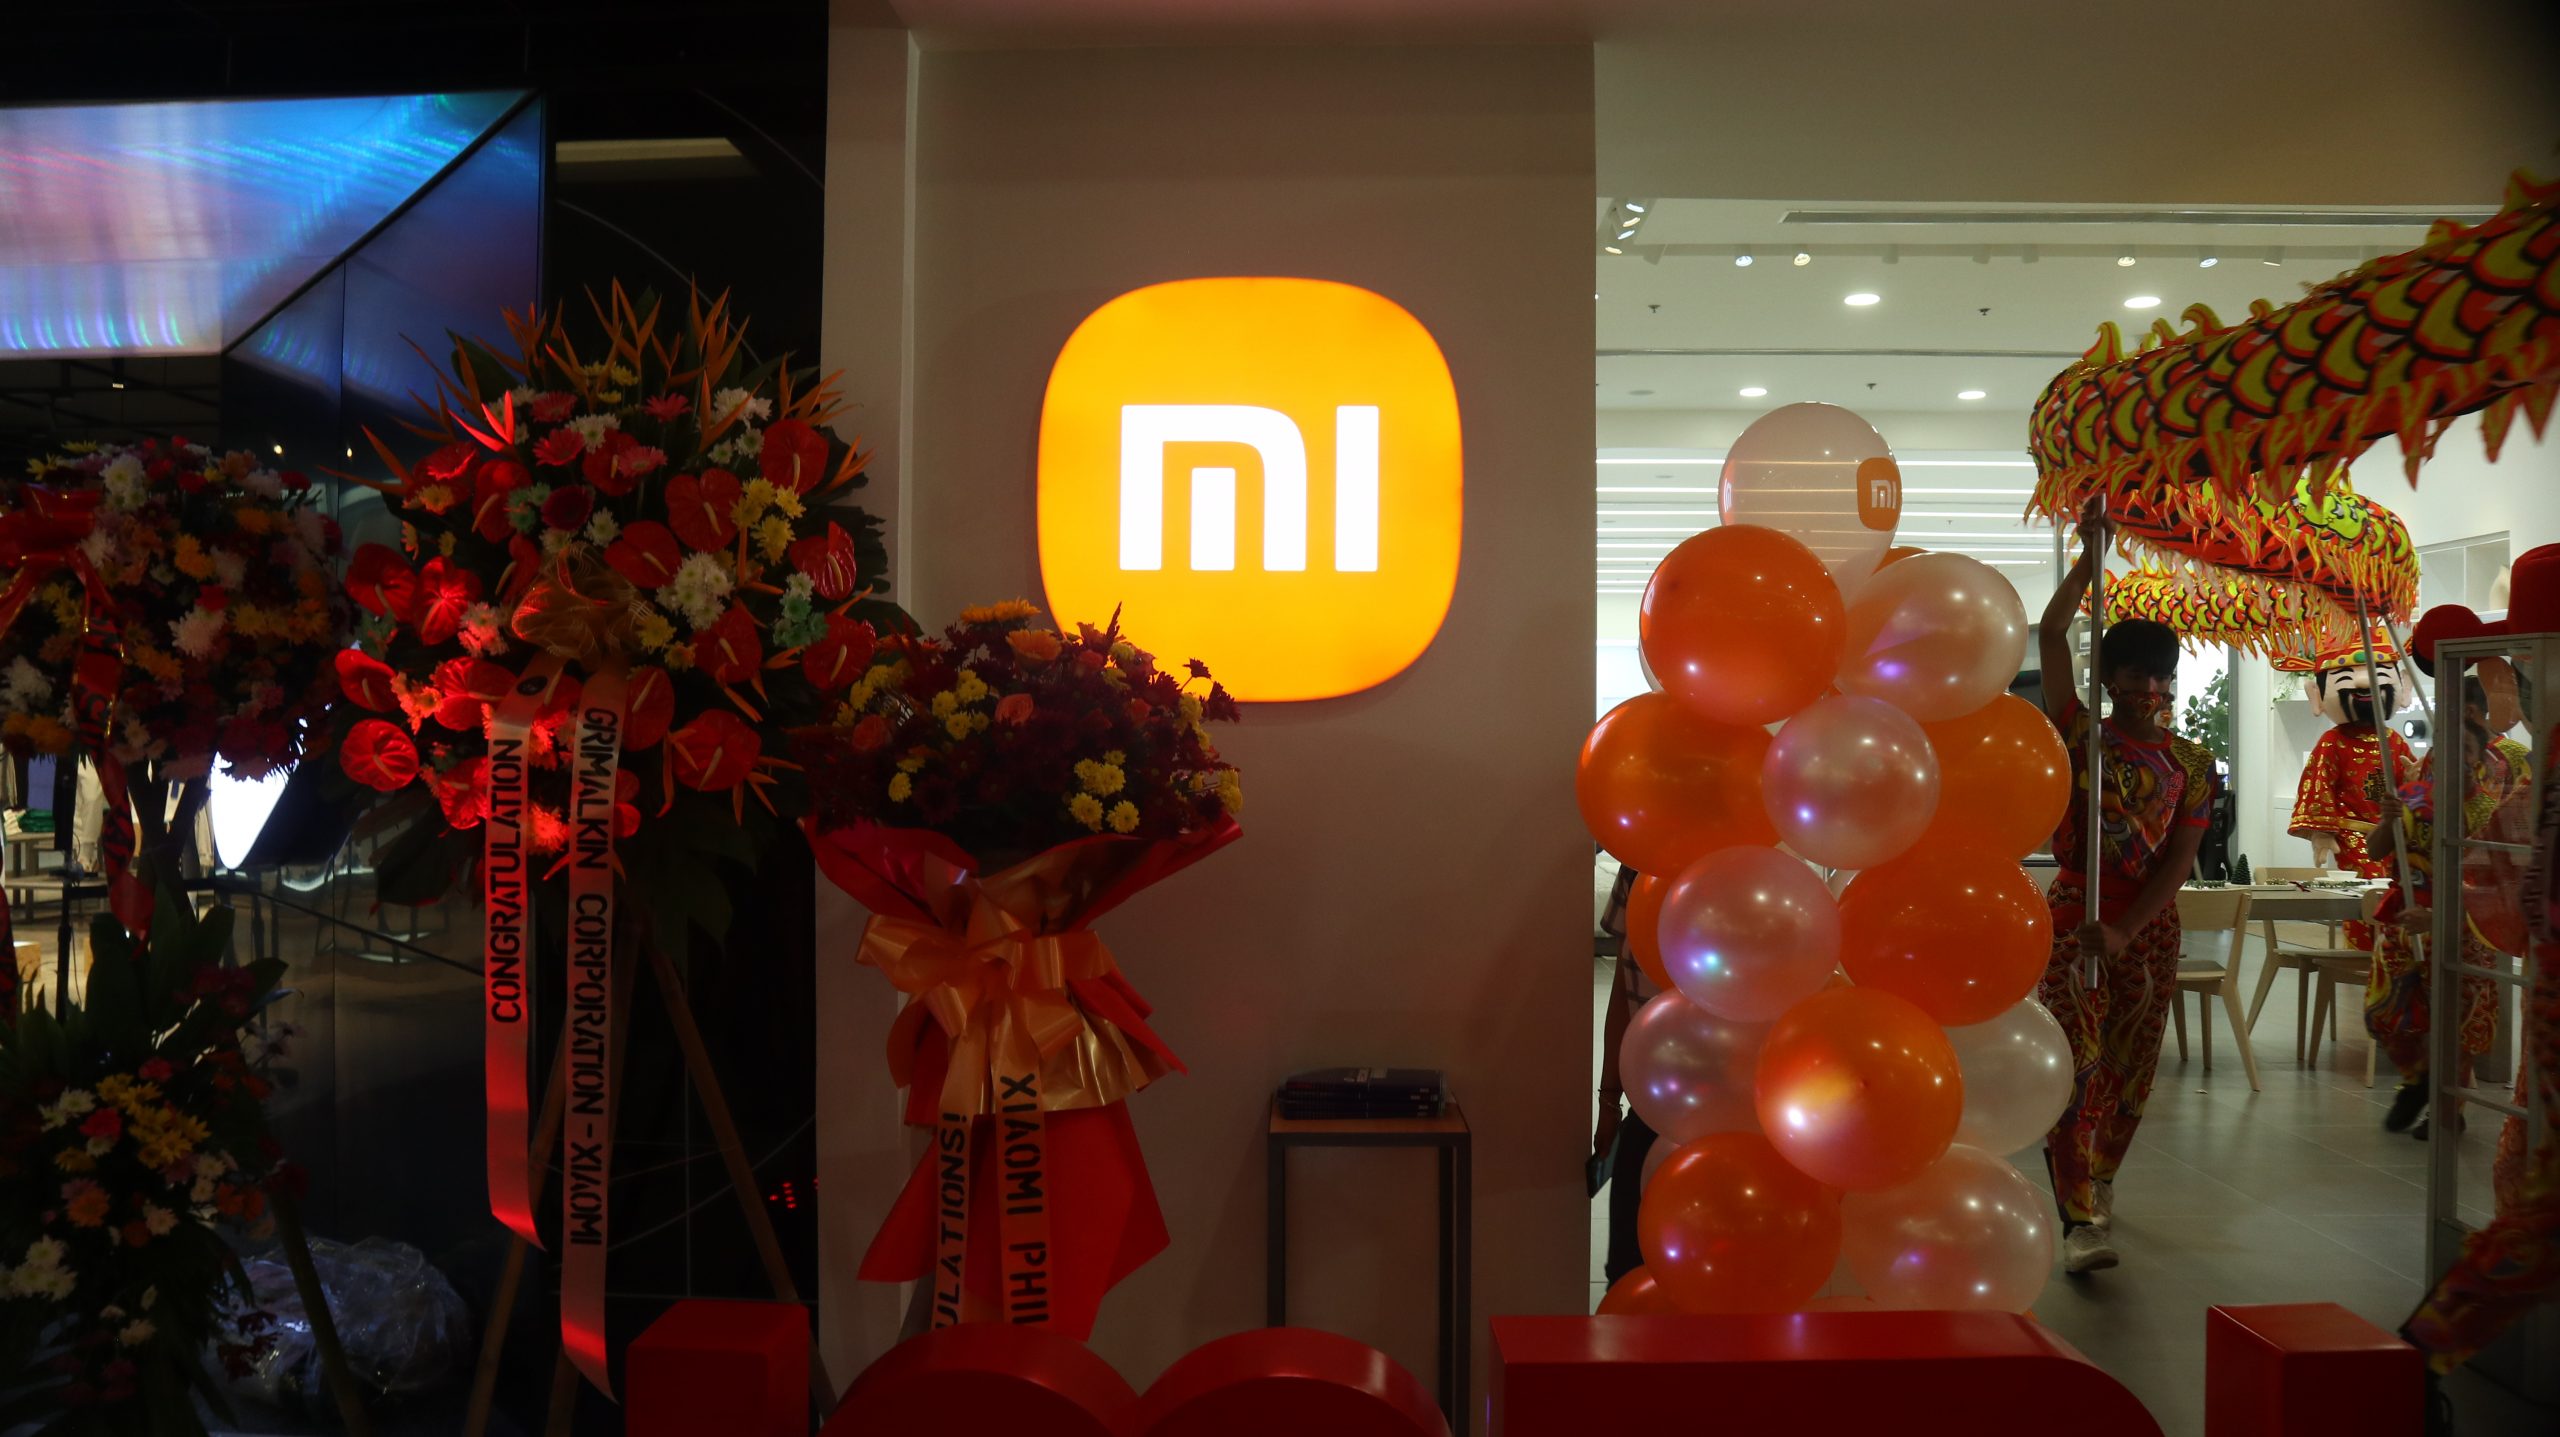 Xiaomi Opens Their Biggest Flagship Store Offers A Smarter Home Experience 6512